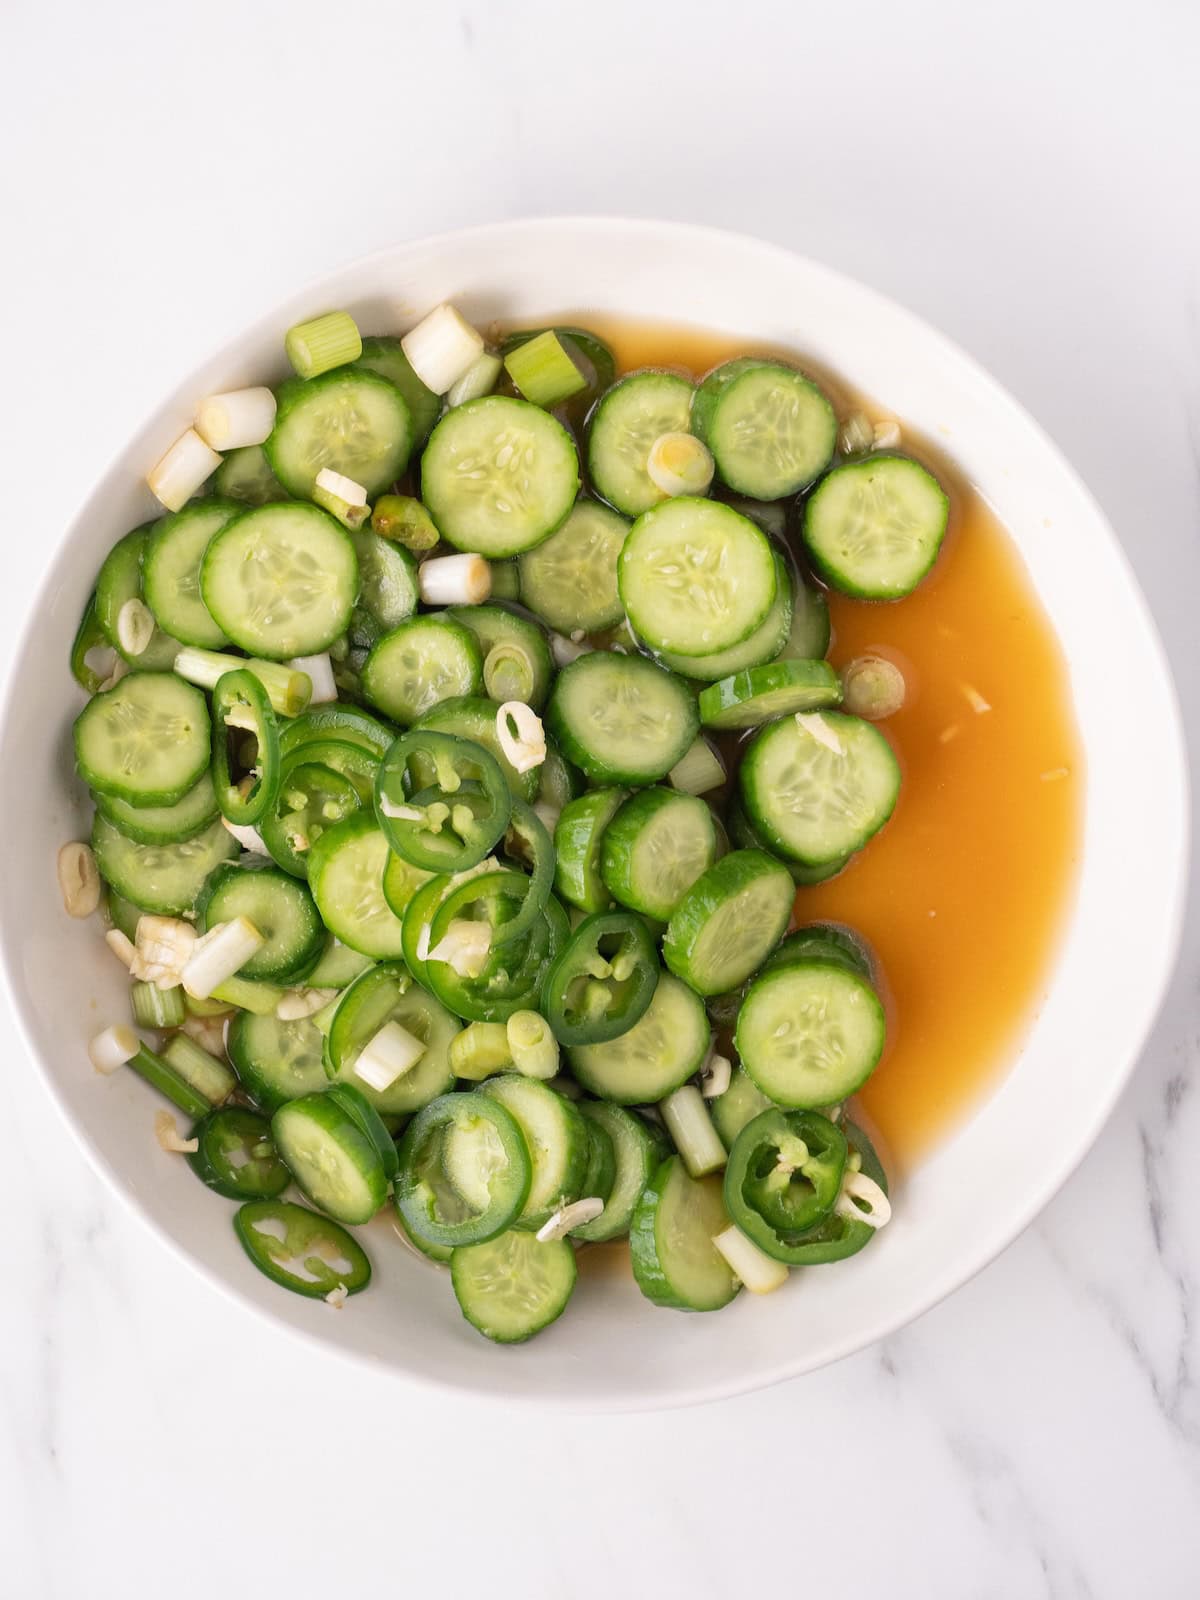 A bowl with sliced cucumbers and its seasonings, soaked in a liquid mixture containing rice vinegar, sesame oil, honey and soy sauce.